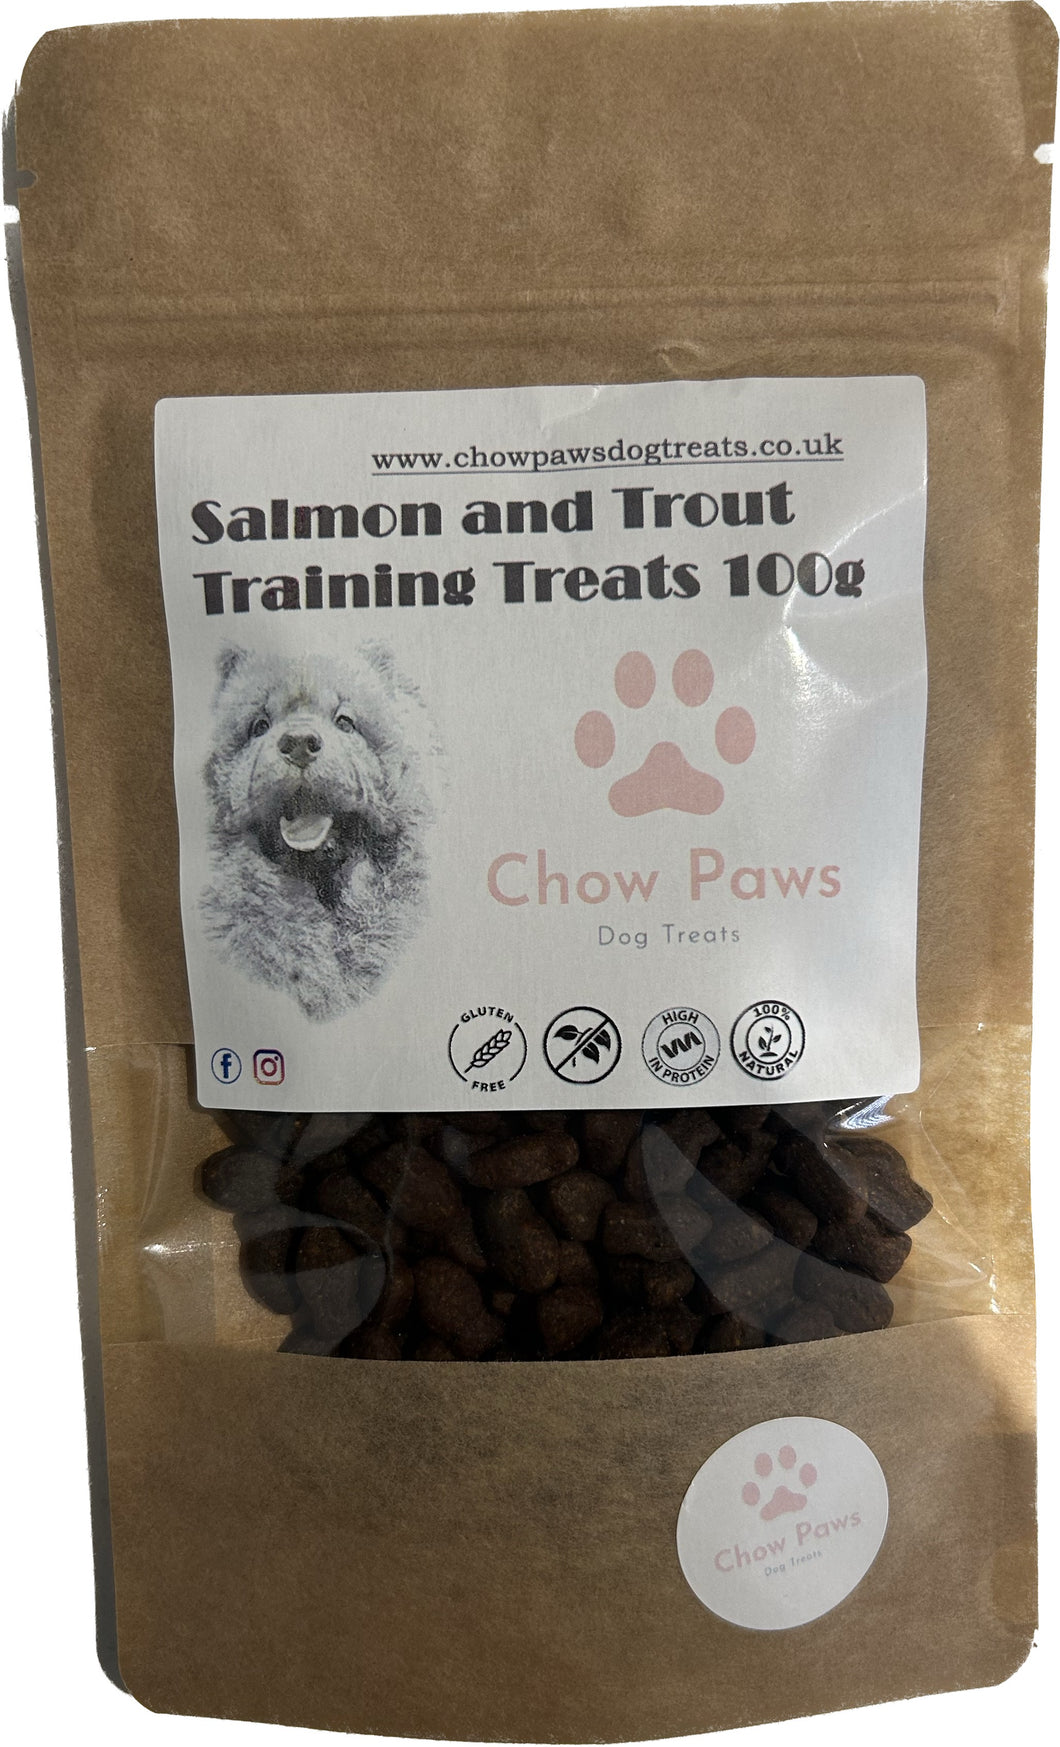 Salmon and Trout Training Treats 100g